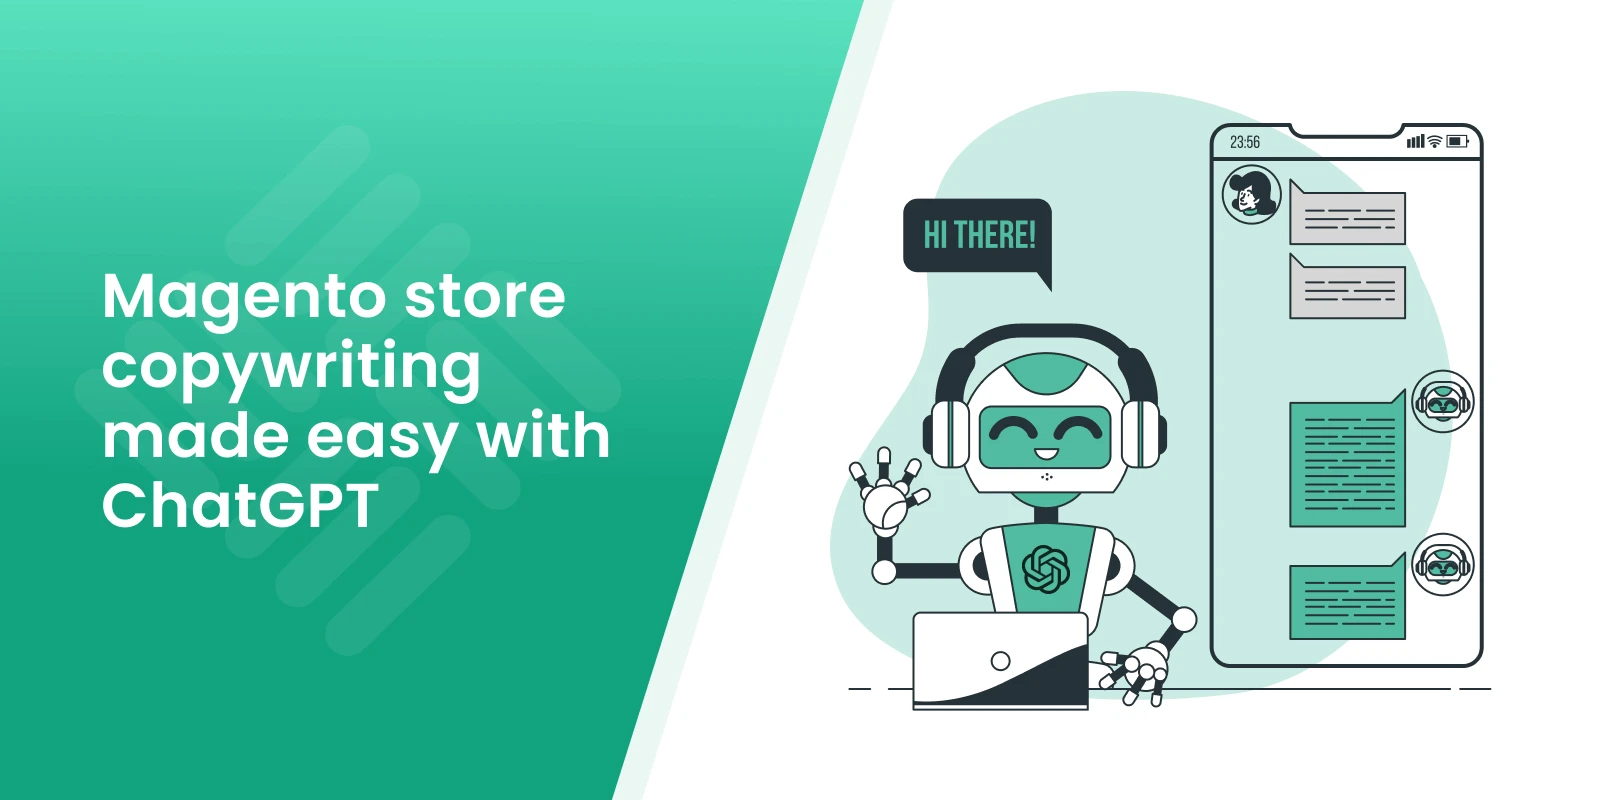 Magento & ChatGPT: how to simplify copywriting for your store